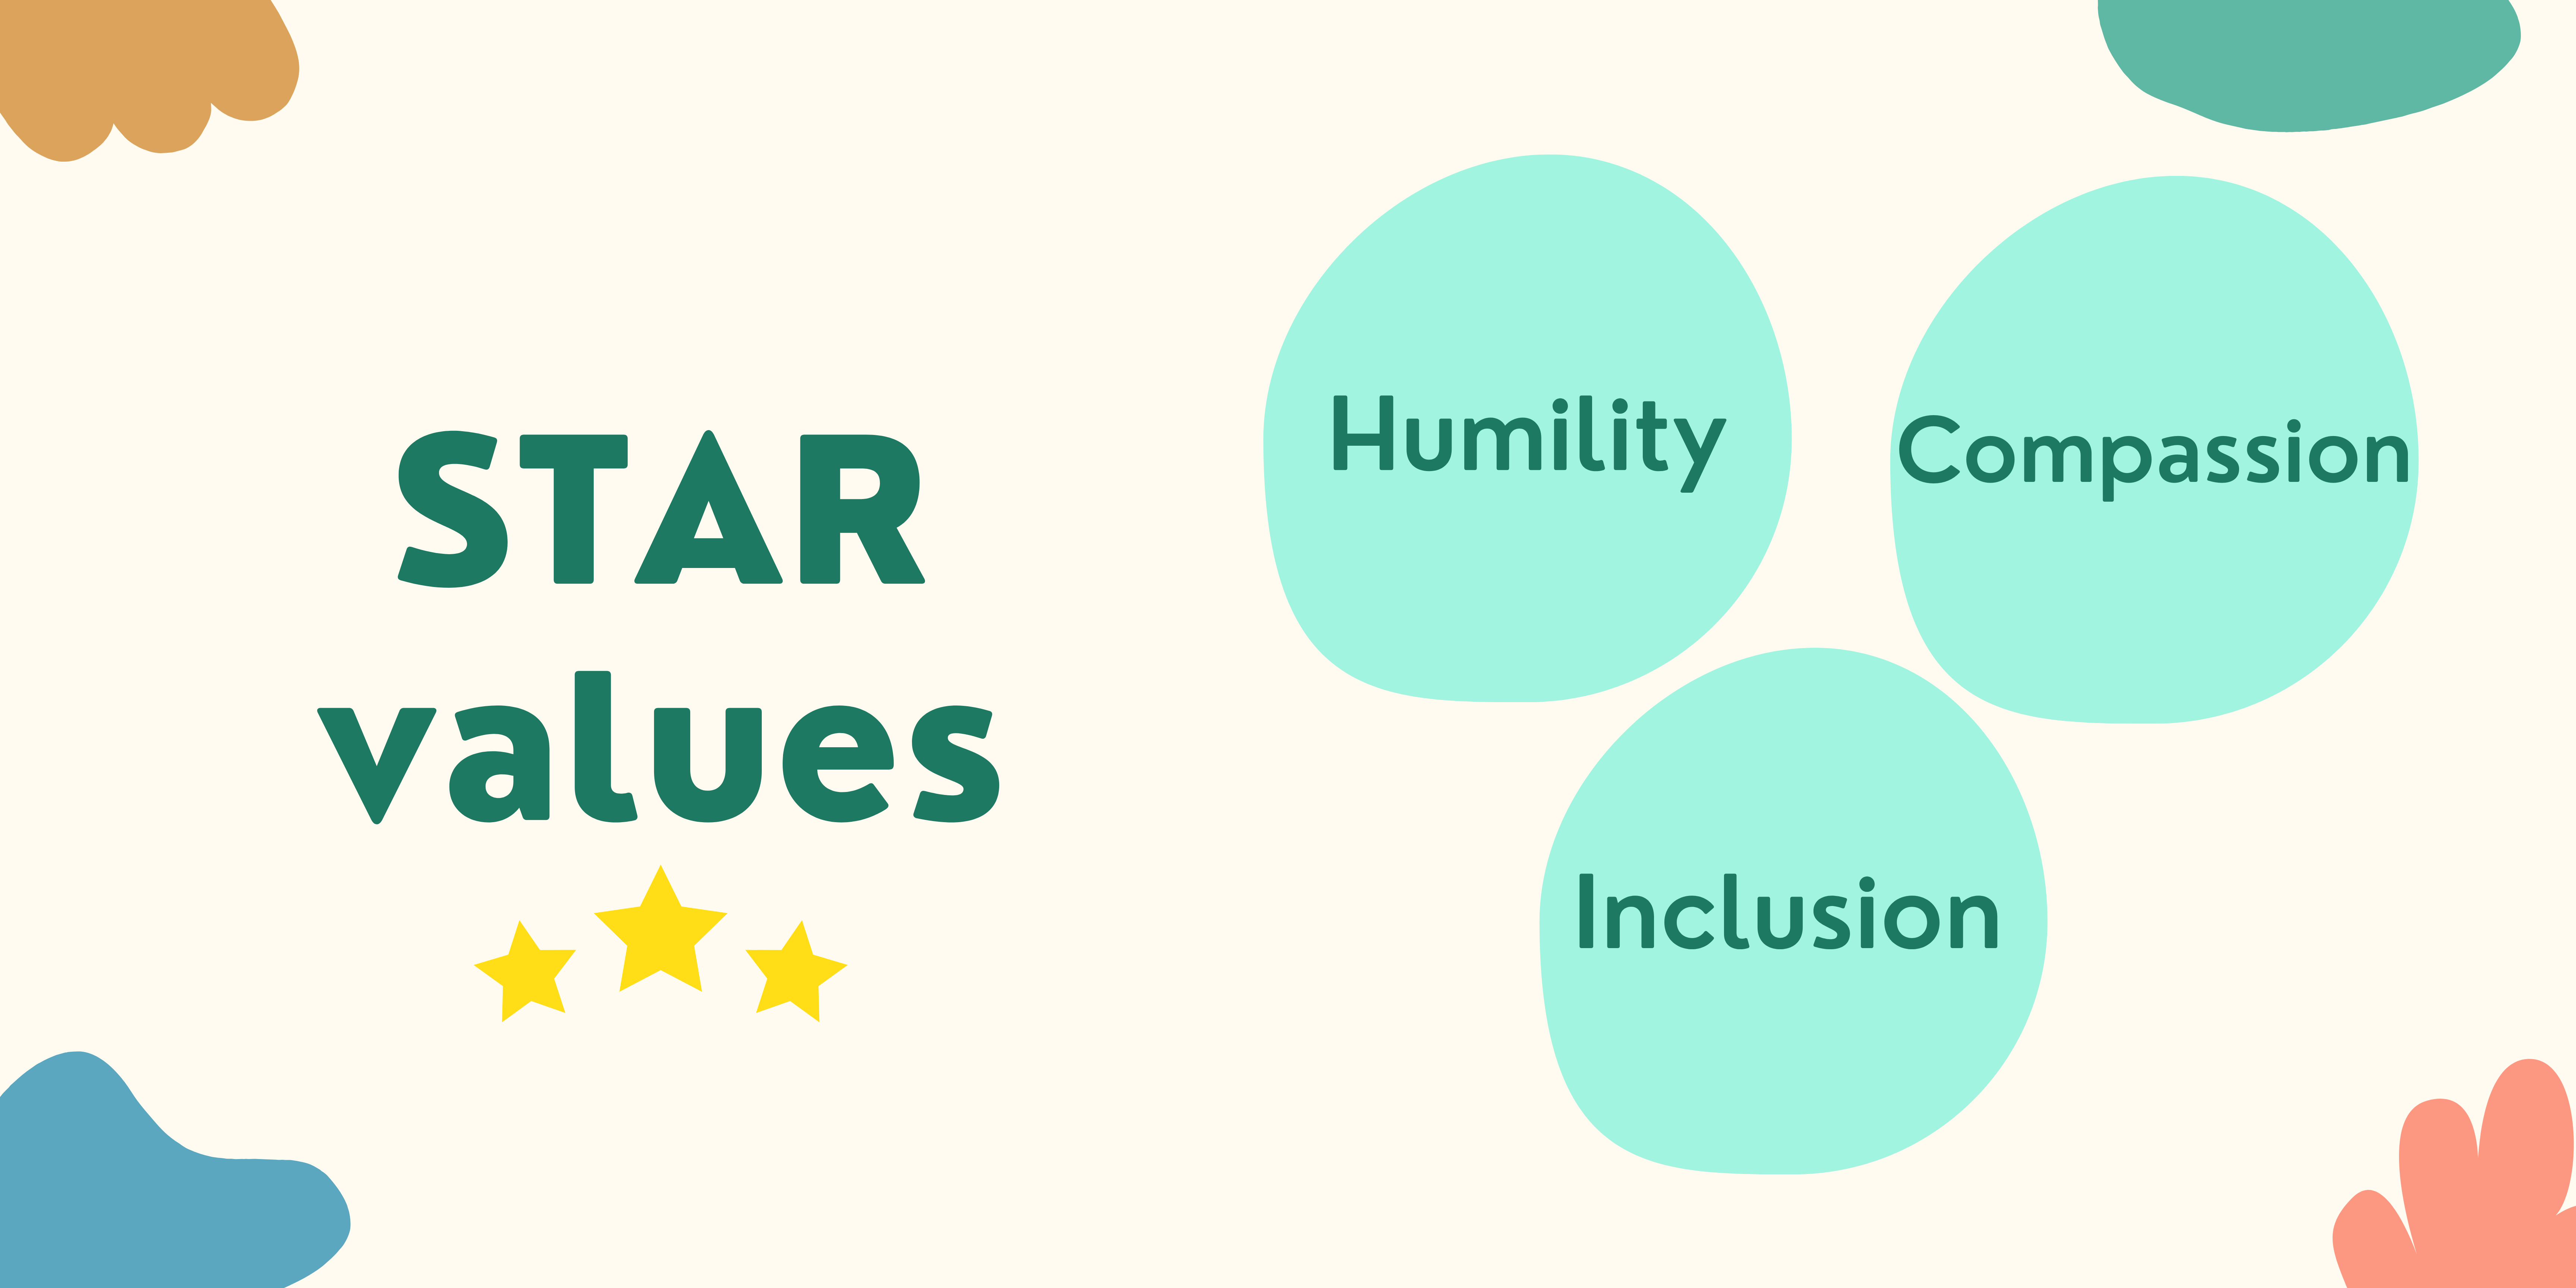 Light yellow background with the words STAR values in dark green. There are three green circles on the right side with the words humility, compassion and inclusion in them.